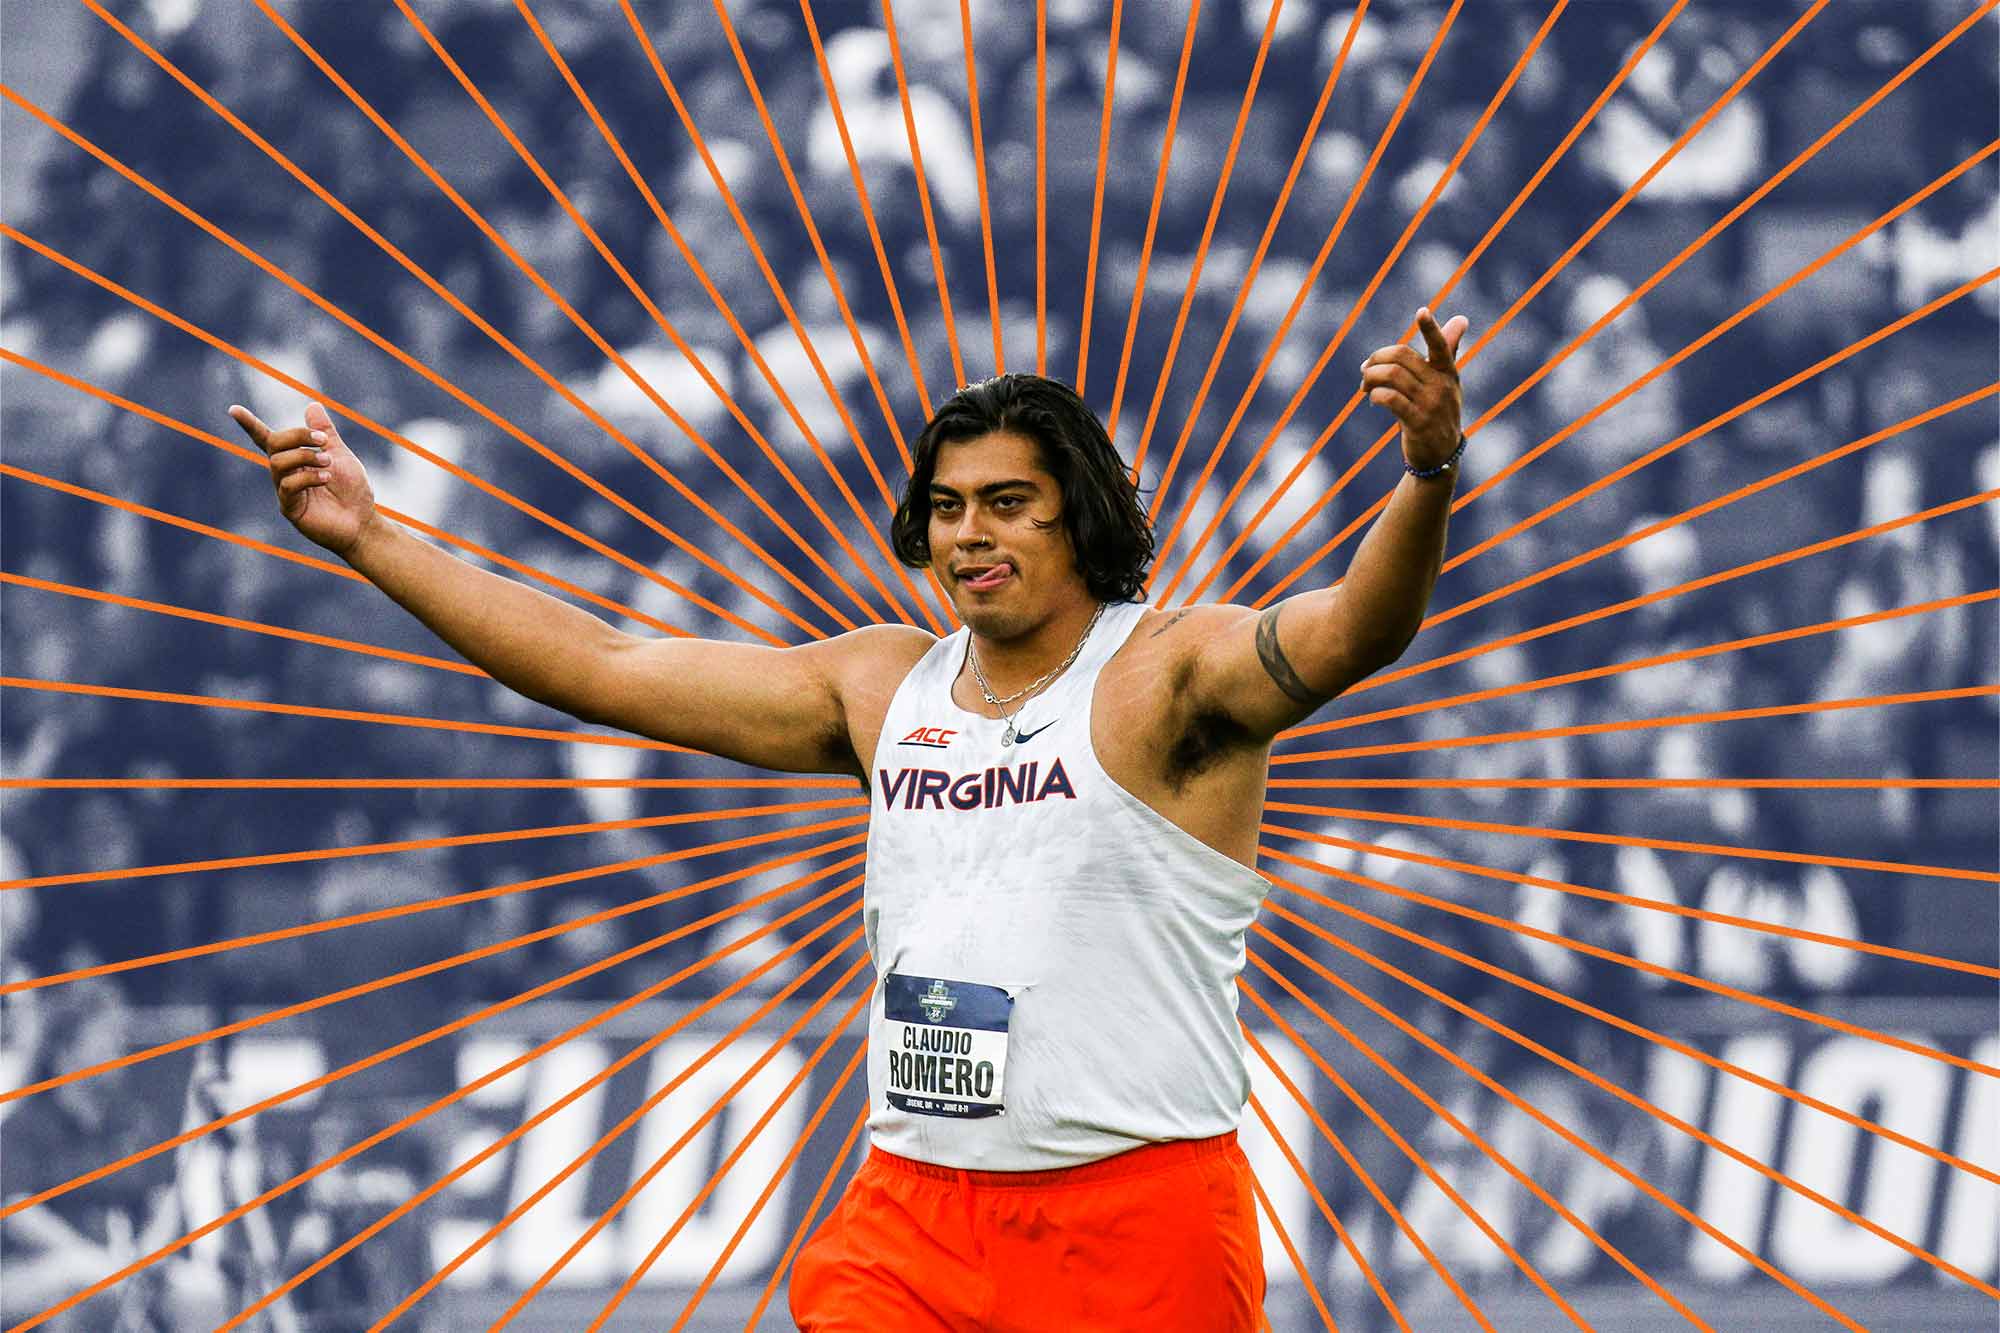 Claudio Romero stands with his arms outstretched victoriously. Orange lines radiate from behind him.